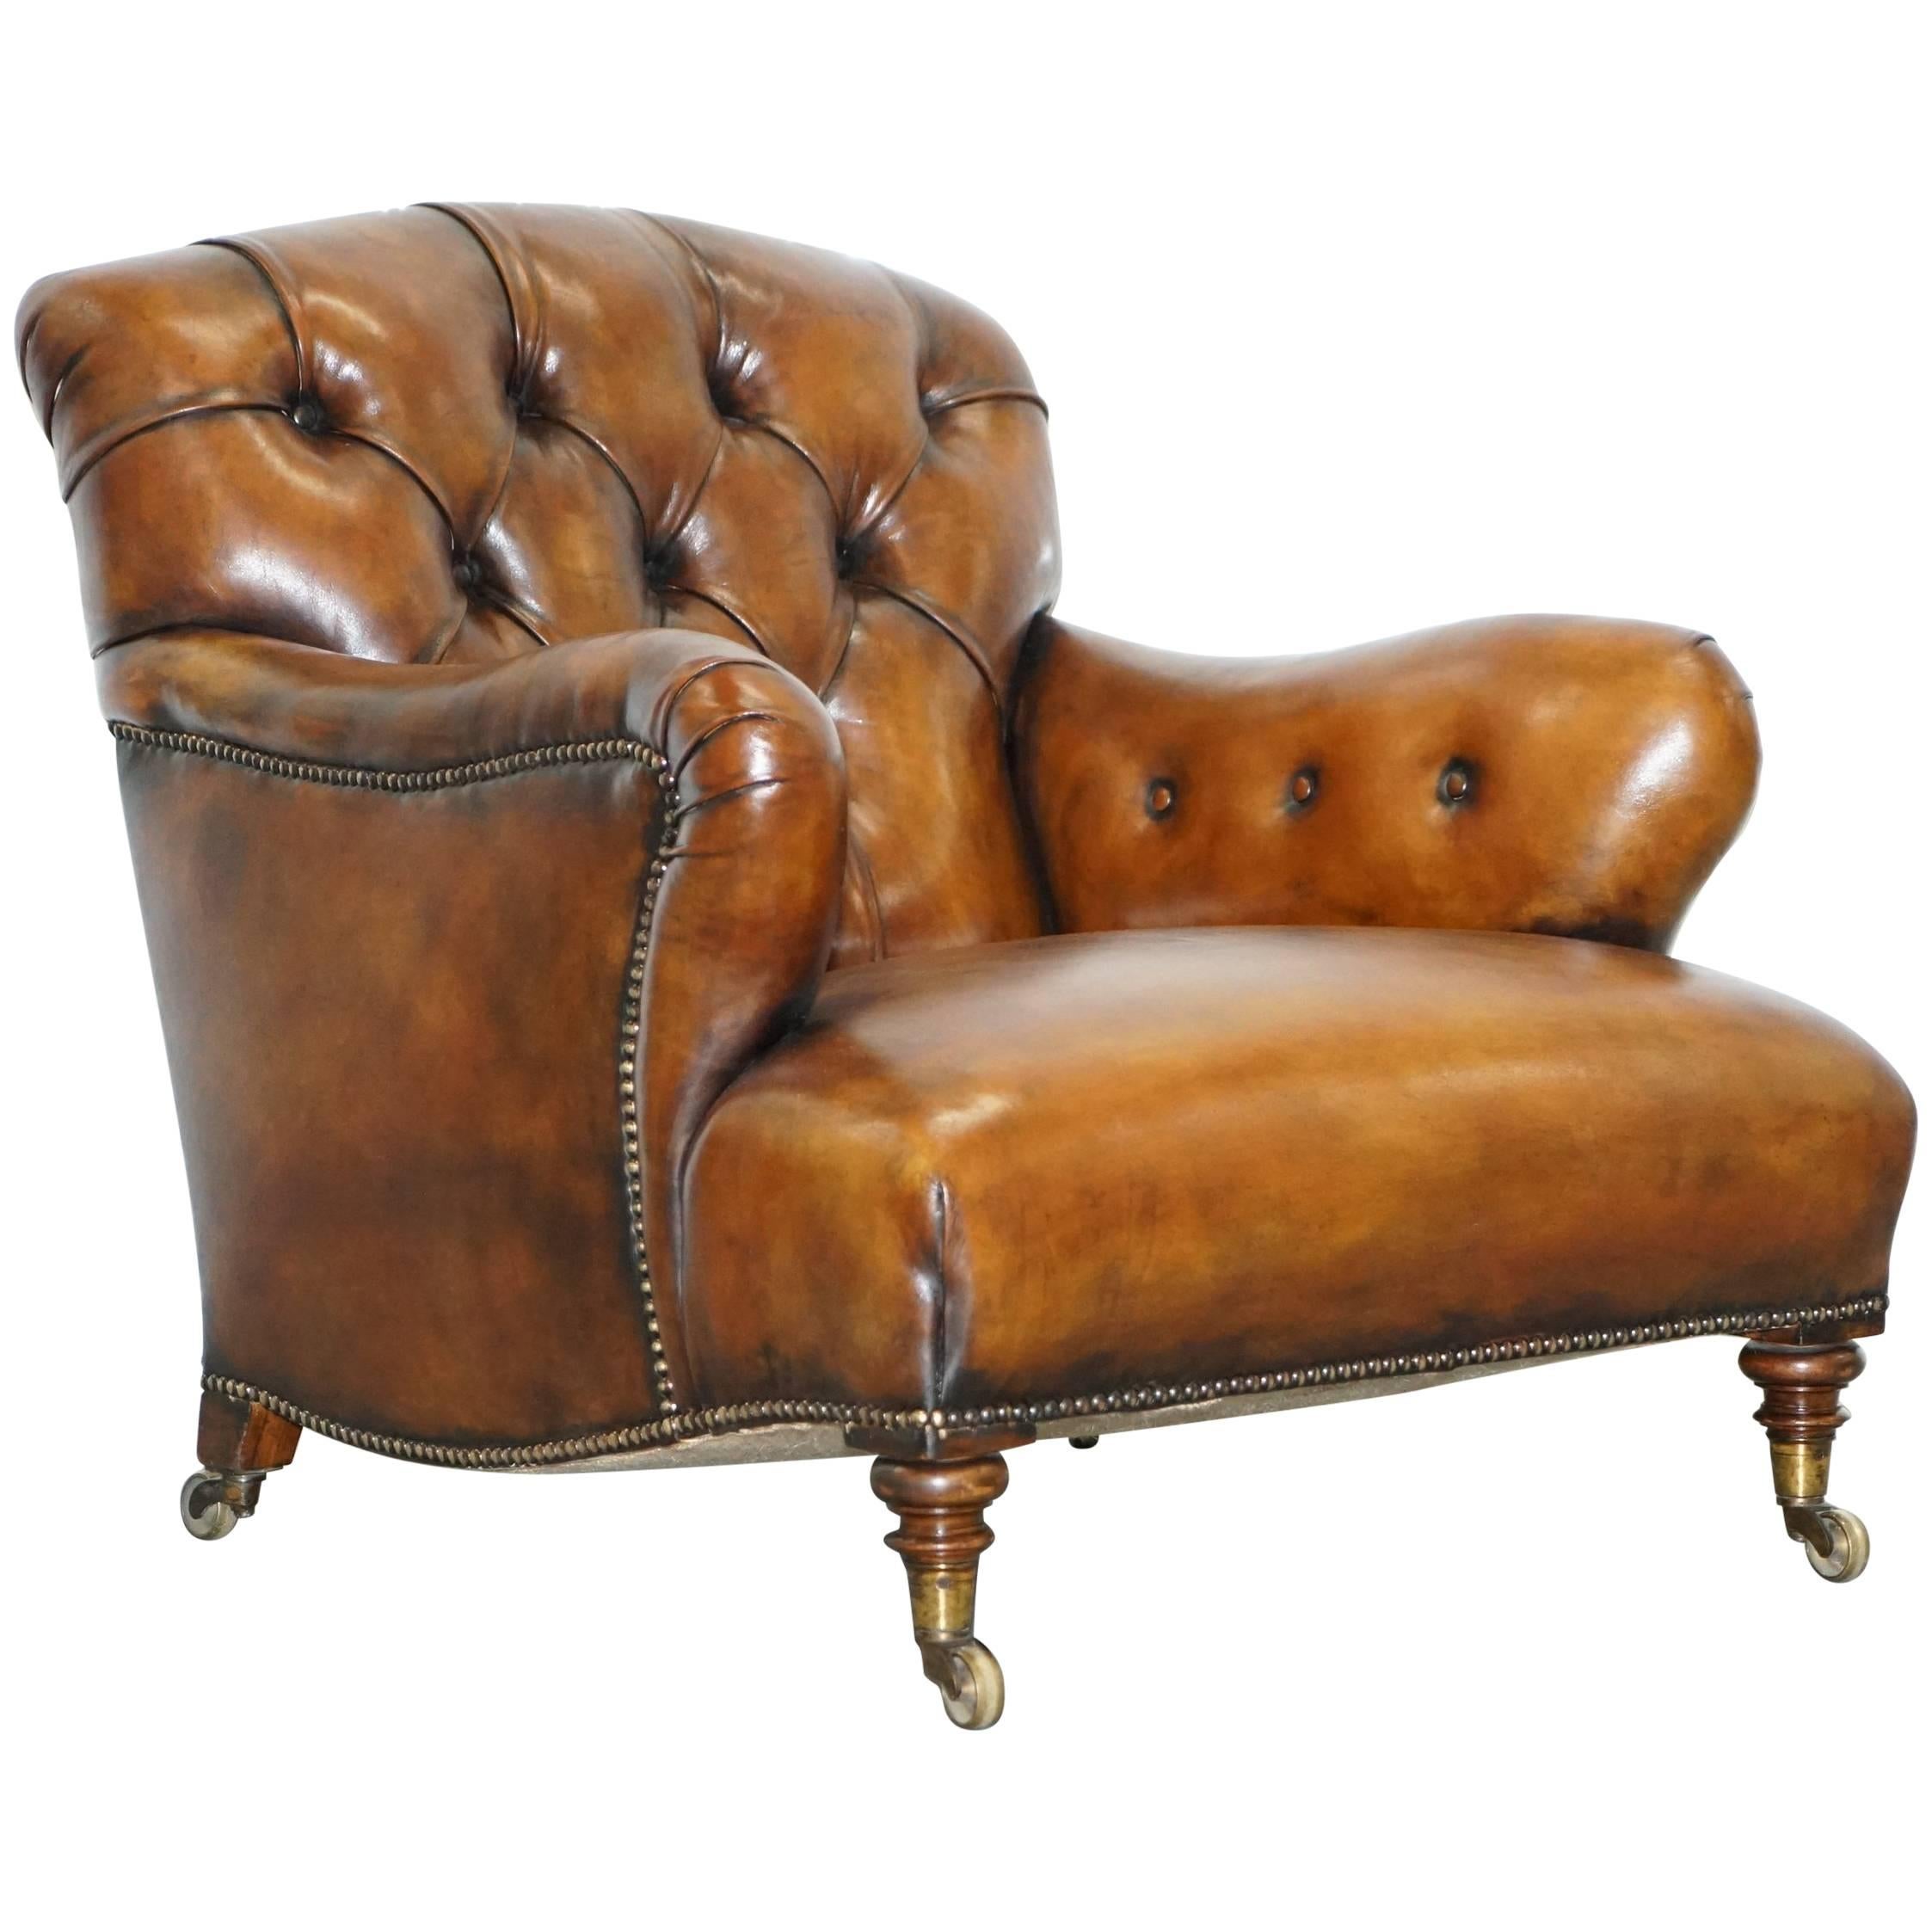 Rare Find Early Victorian Walnut Howard and Son's Fully Restored Club Armchair